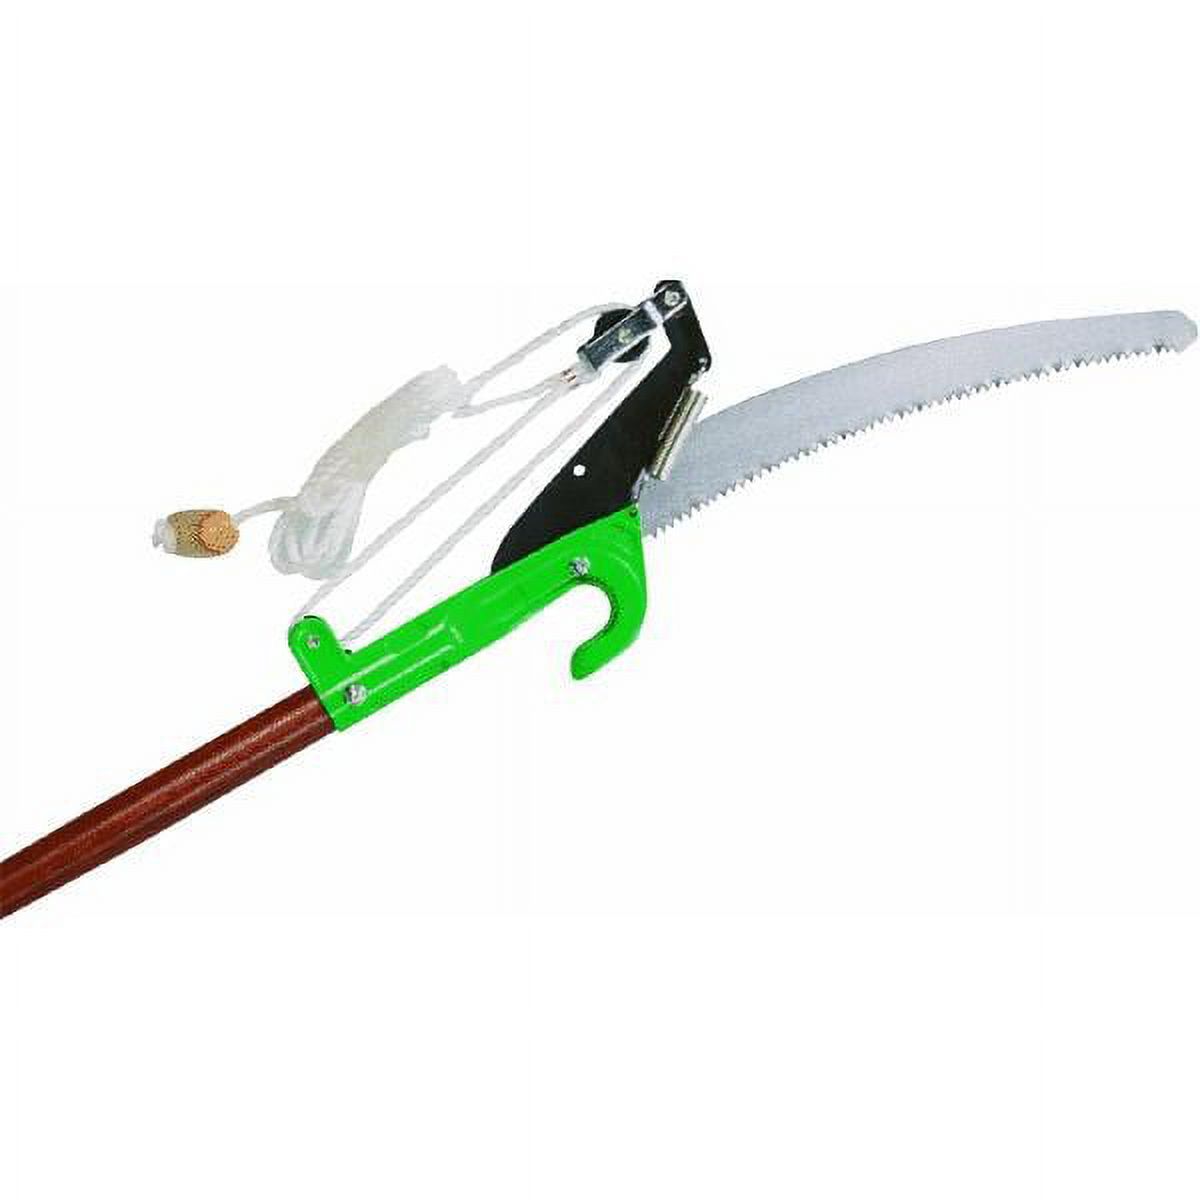 Best Garden 1 In. Cutting Capacity 8 Ft. Wood Pole Tree Pruner M4ATWS1 - image 1 of 3